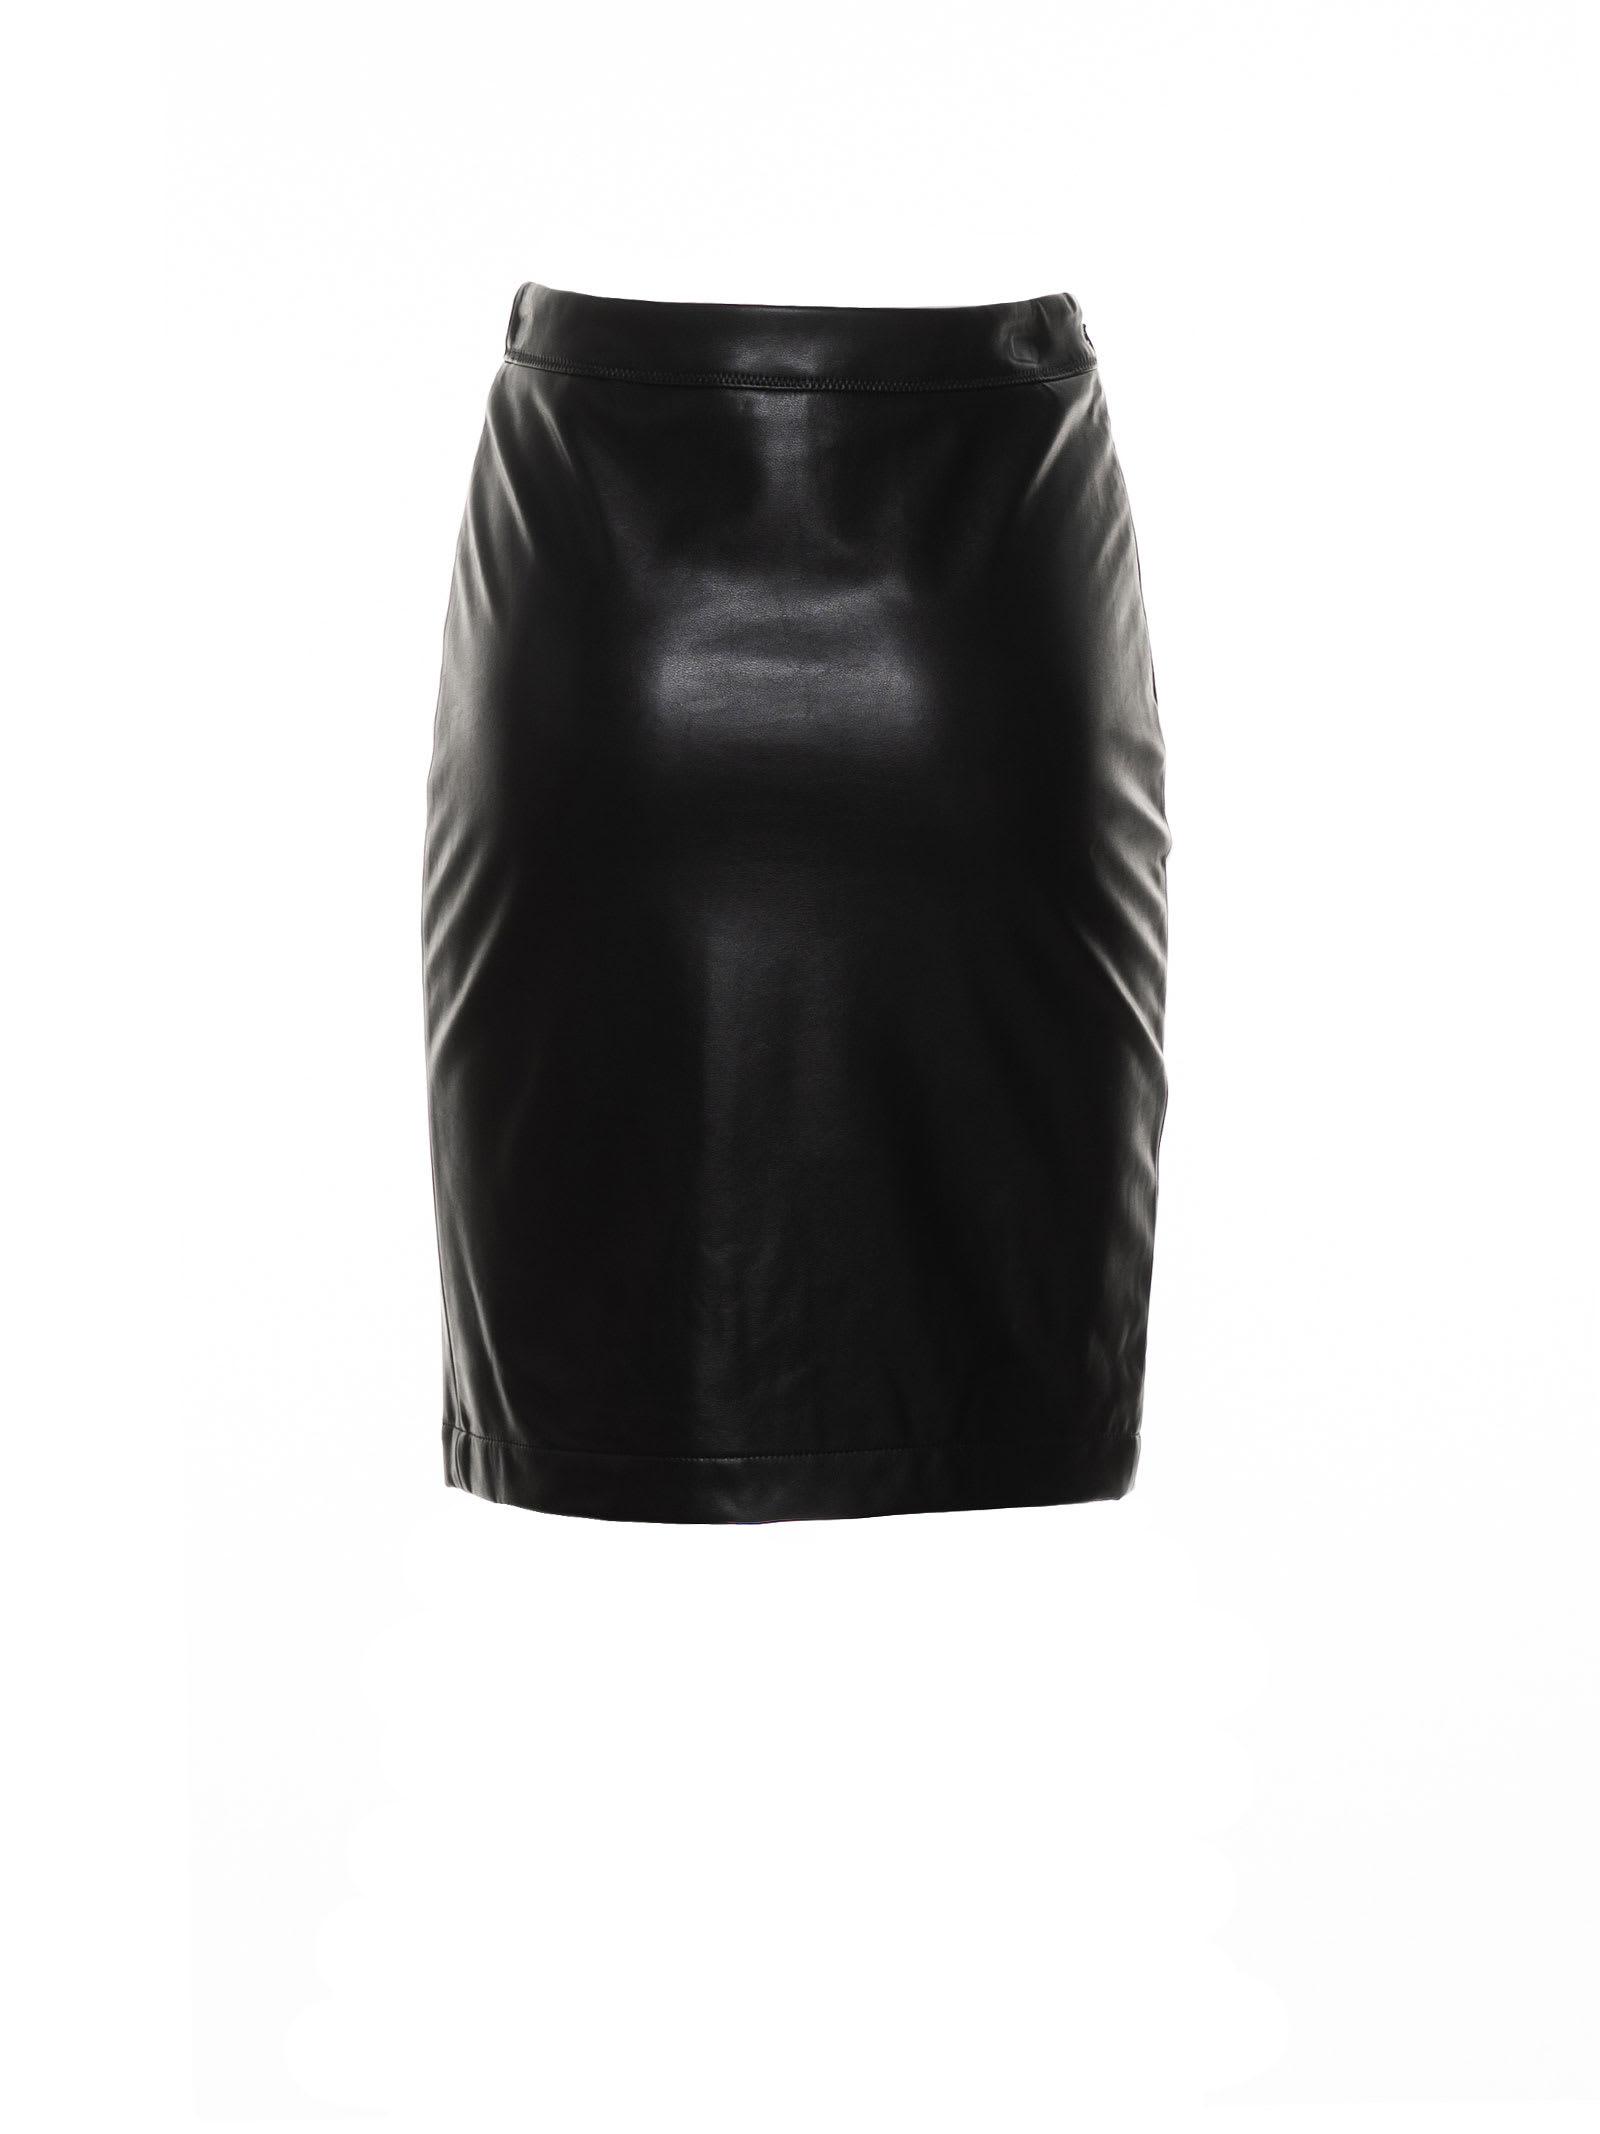 Michael Kors Stretch Faux Leather Skirt in Black | Lyst